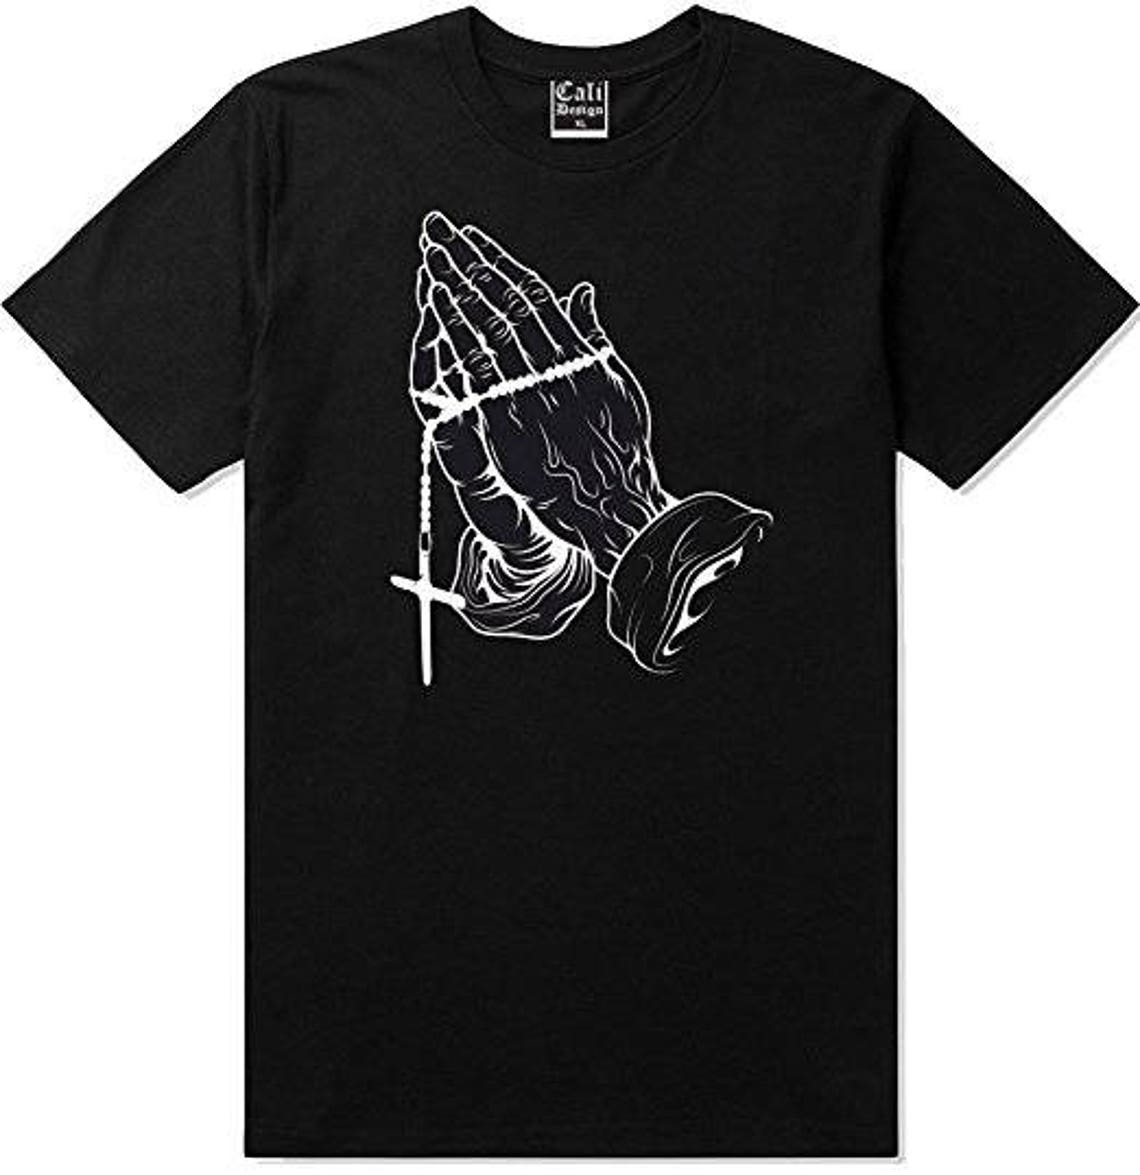 Praying Hands T shirt Urban Wear Crew Tee Blessed Rosary 6 | Etsy